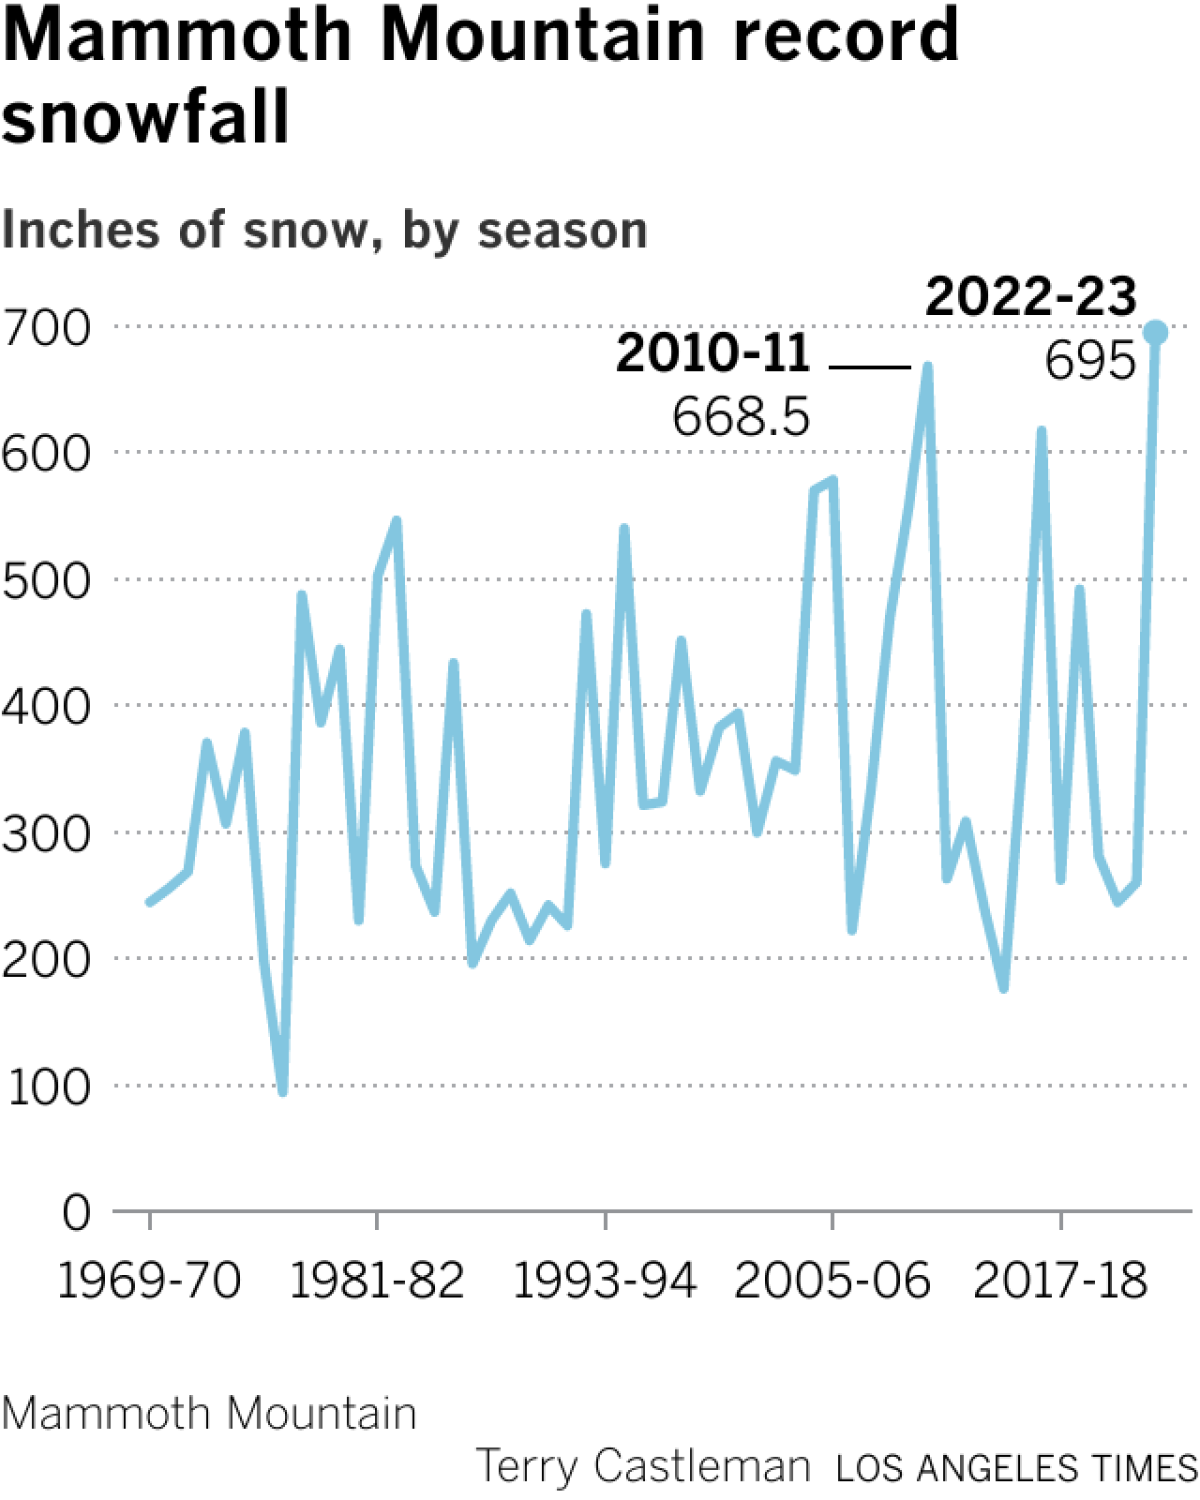 Line chart shows the total inches of snow at Mammoth Mountain, by season, starting with the 1969 to 1970 season. This season, 2022 to 2023, has seen a record number of 695 inches of snow, surpassing the previous record of 668.5 inches during the 2010 to 2011 season.